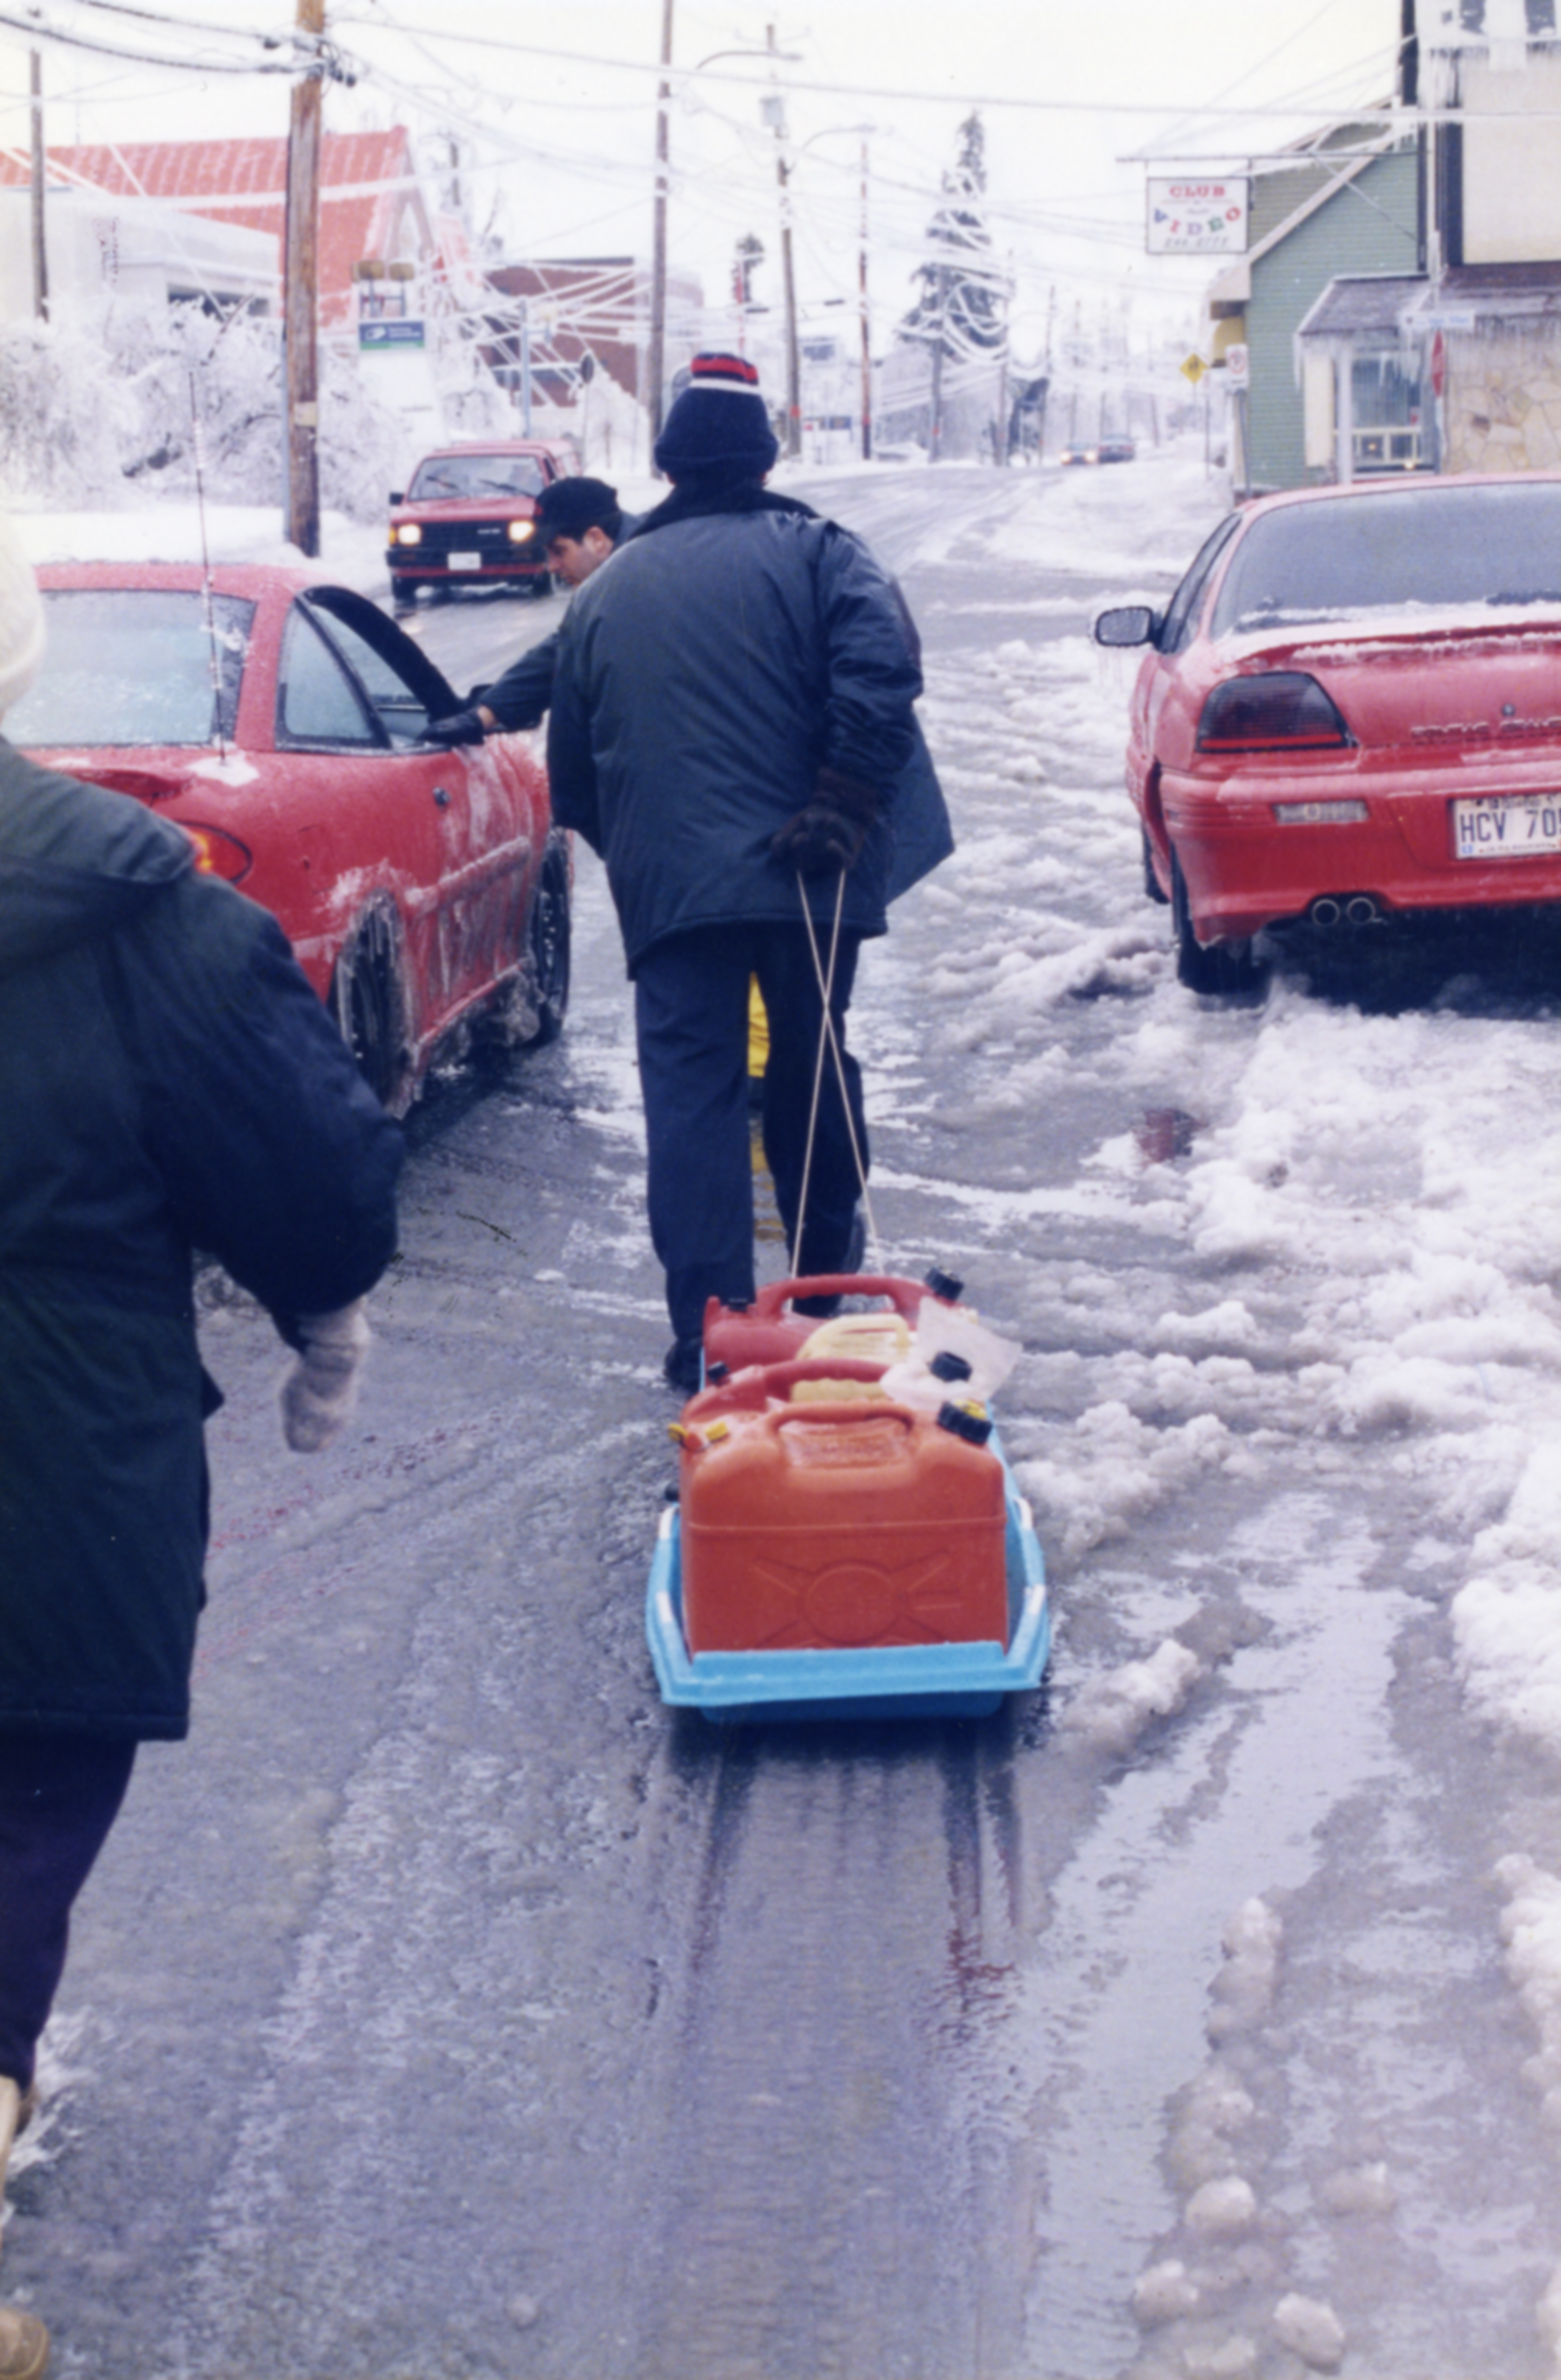 This citizen transported gas tins in a sled, profitting from the icy roads.